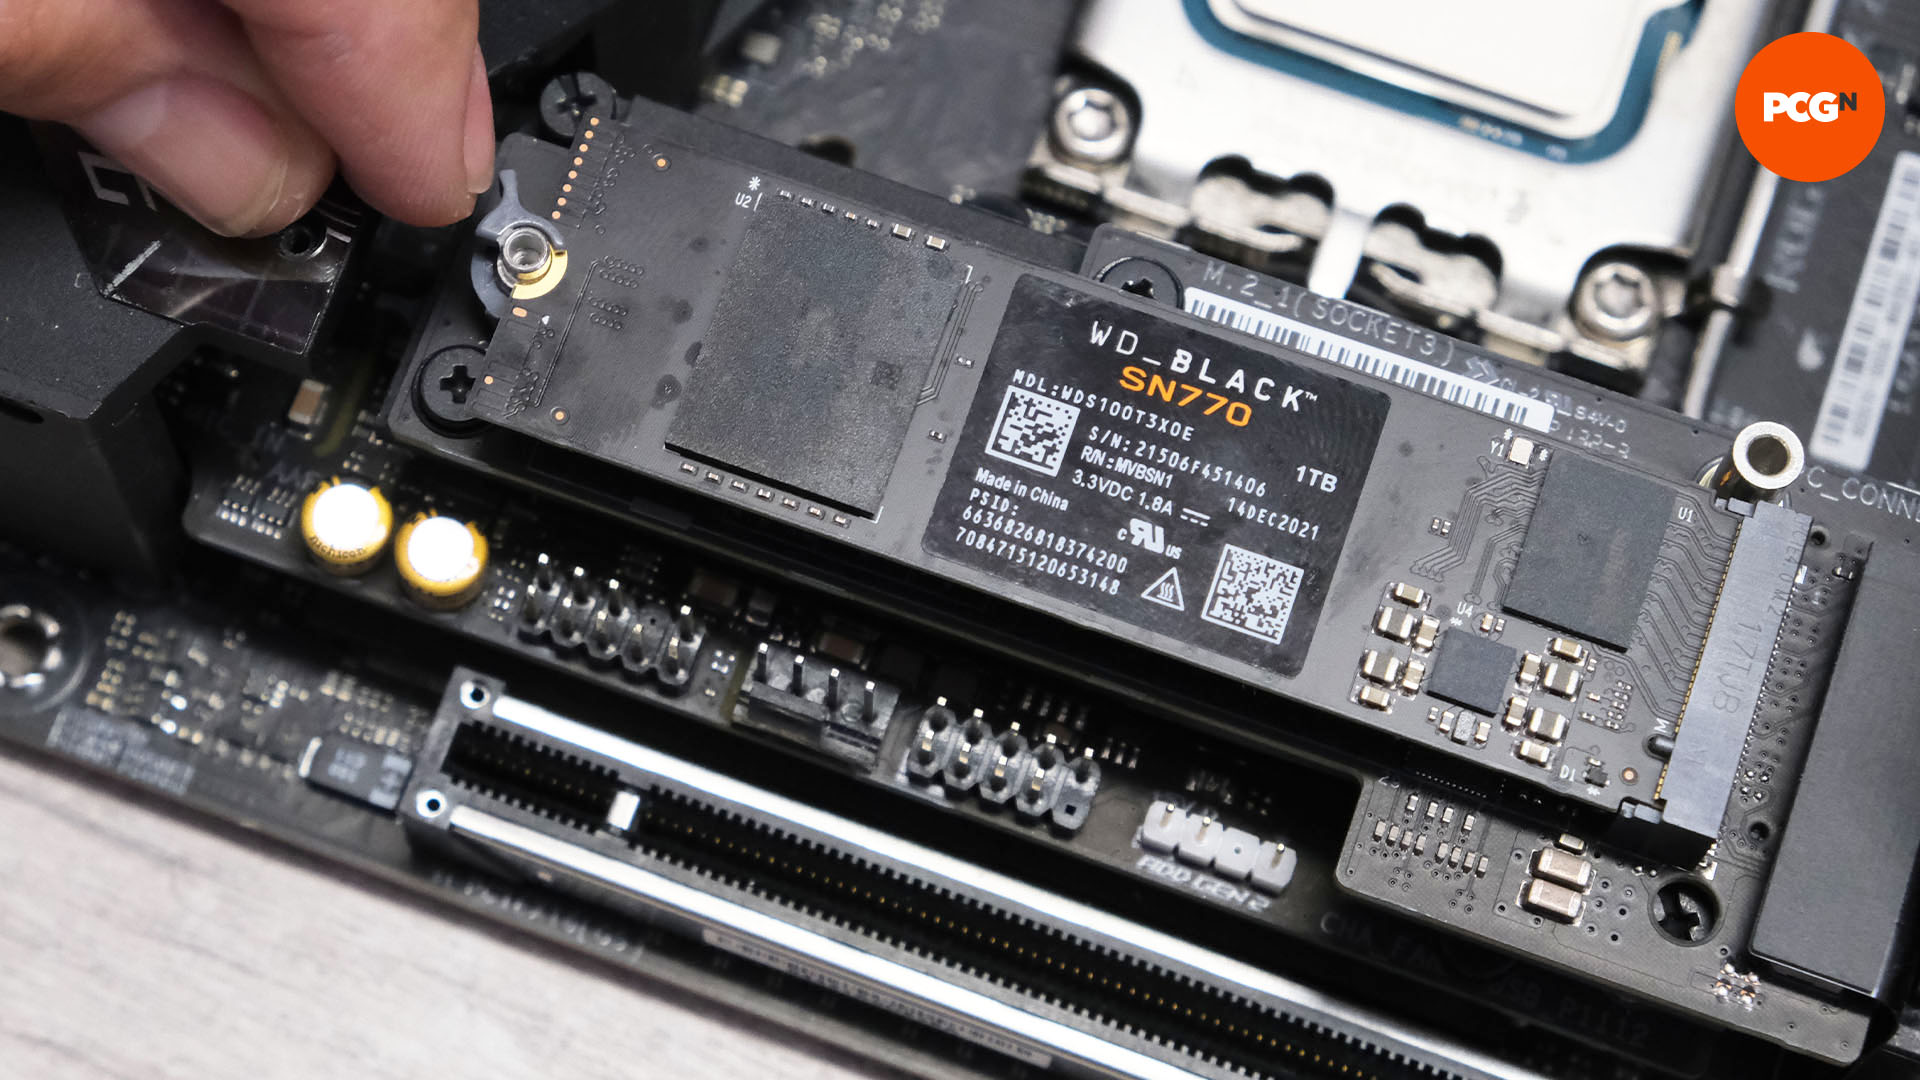 How to build a gaming PC: M.2 SSD secured with Asus Q-Latch